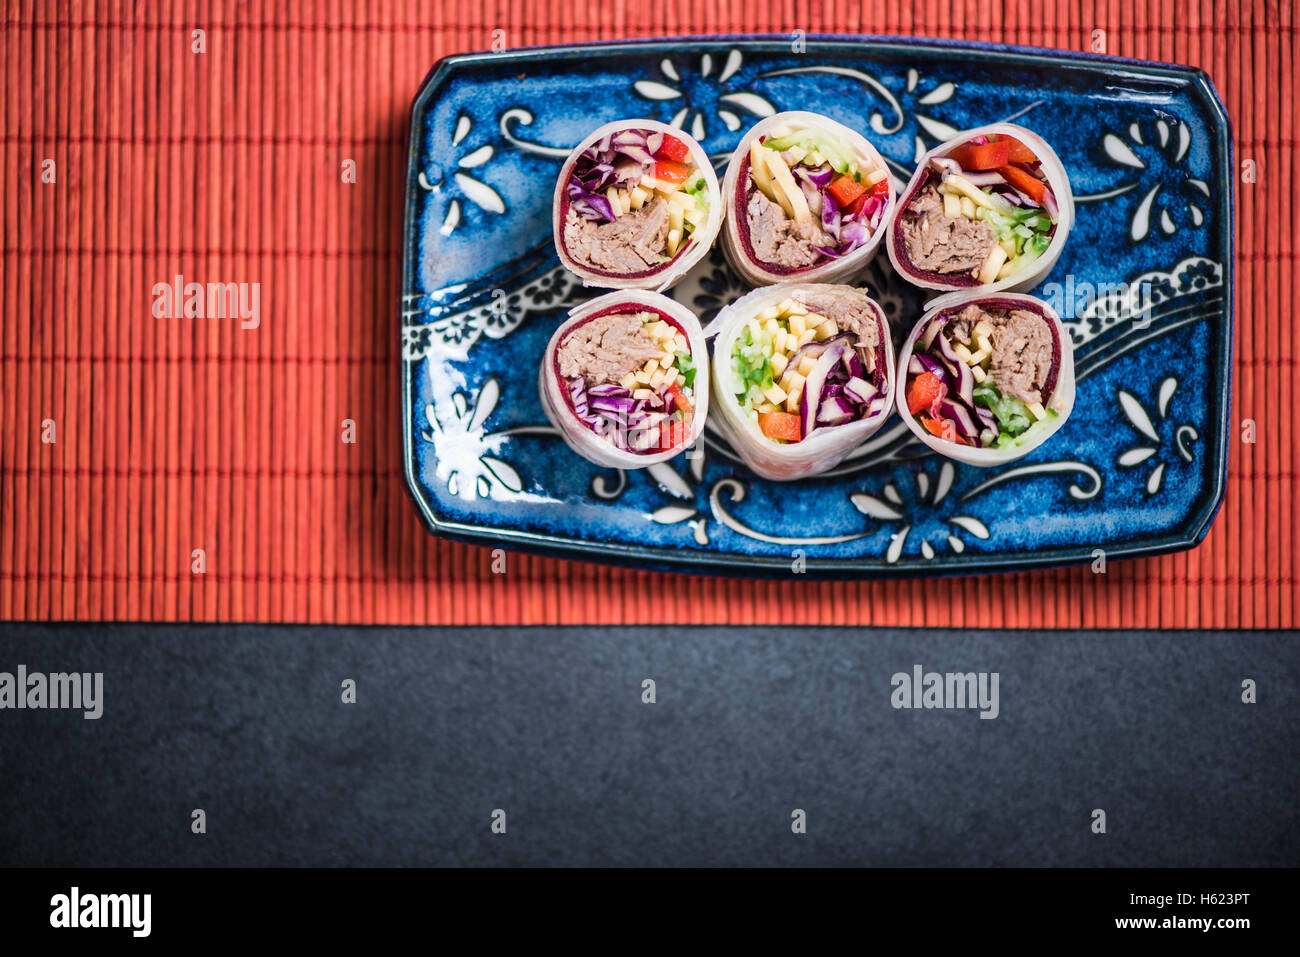 Sushi bites overhead view on bamboo mat Stock Photo